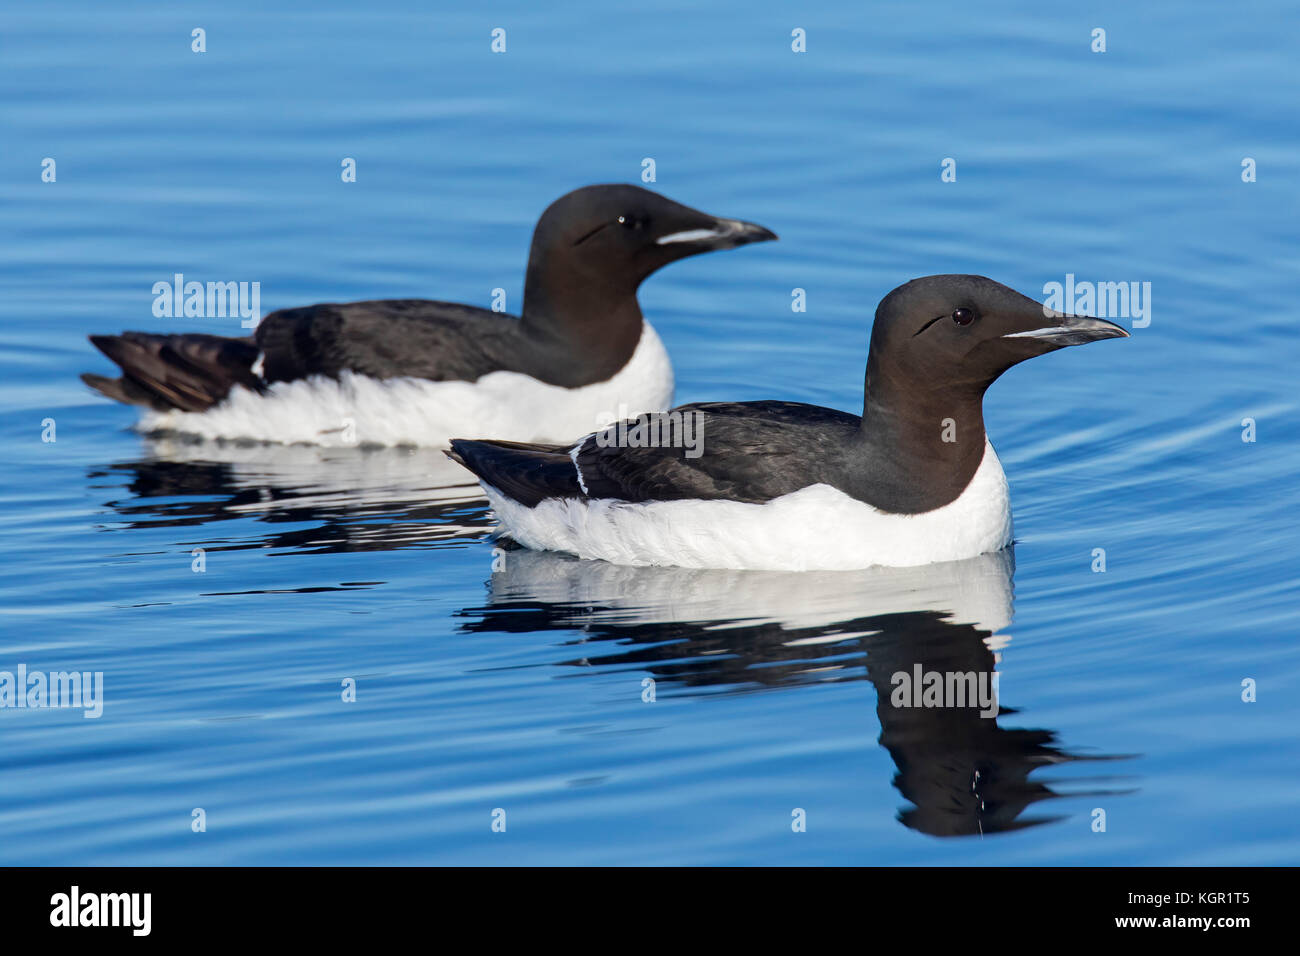 Two thick-billed murres / Brünnich's guillemots (Uria lomvia) swimming in sea, native to the sub-polar regions of the Northern Hemisphere, Svalbard Stock Photo